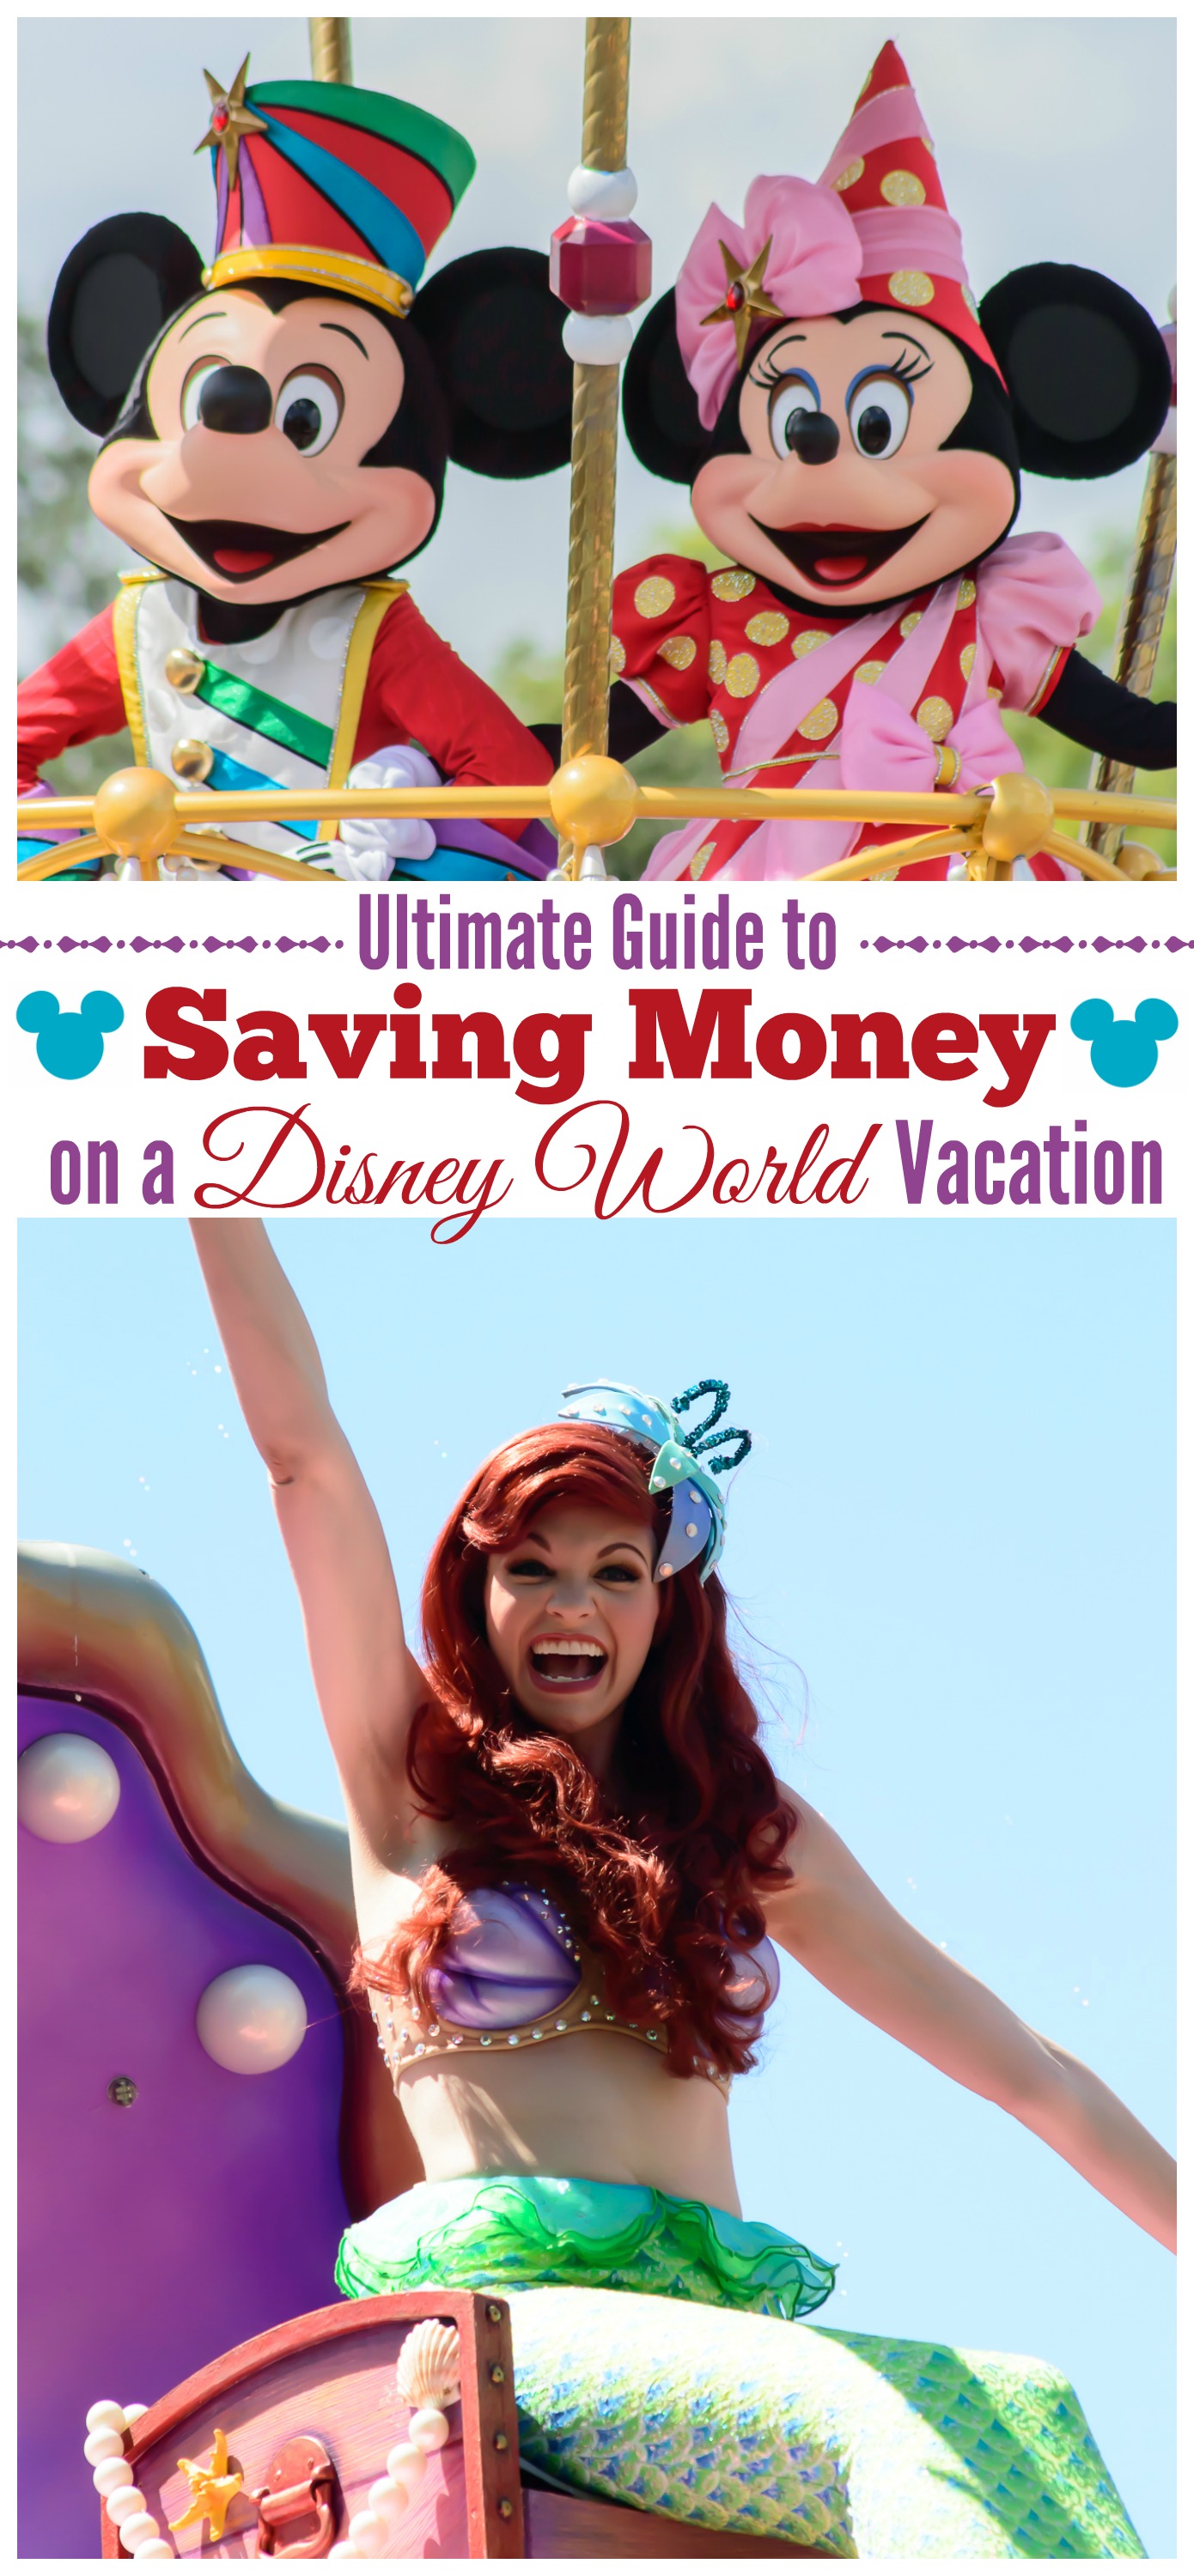 A trip to Disney world doesn't have to break the bank, in fact, it can be downright affordable if you follow these simple tips for saving money on your Disney World vacation! 